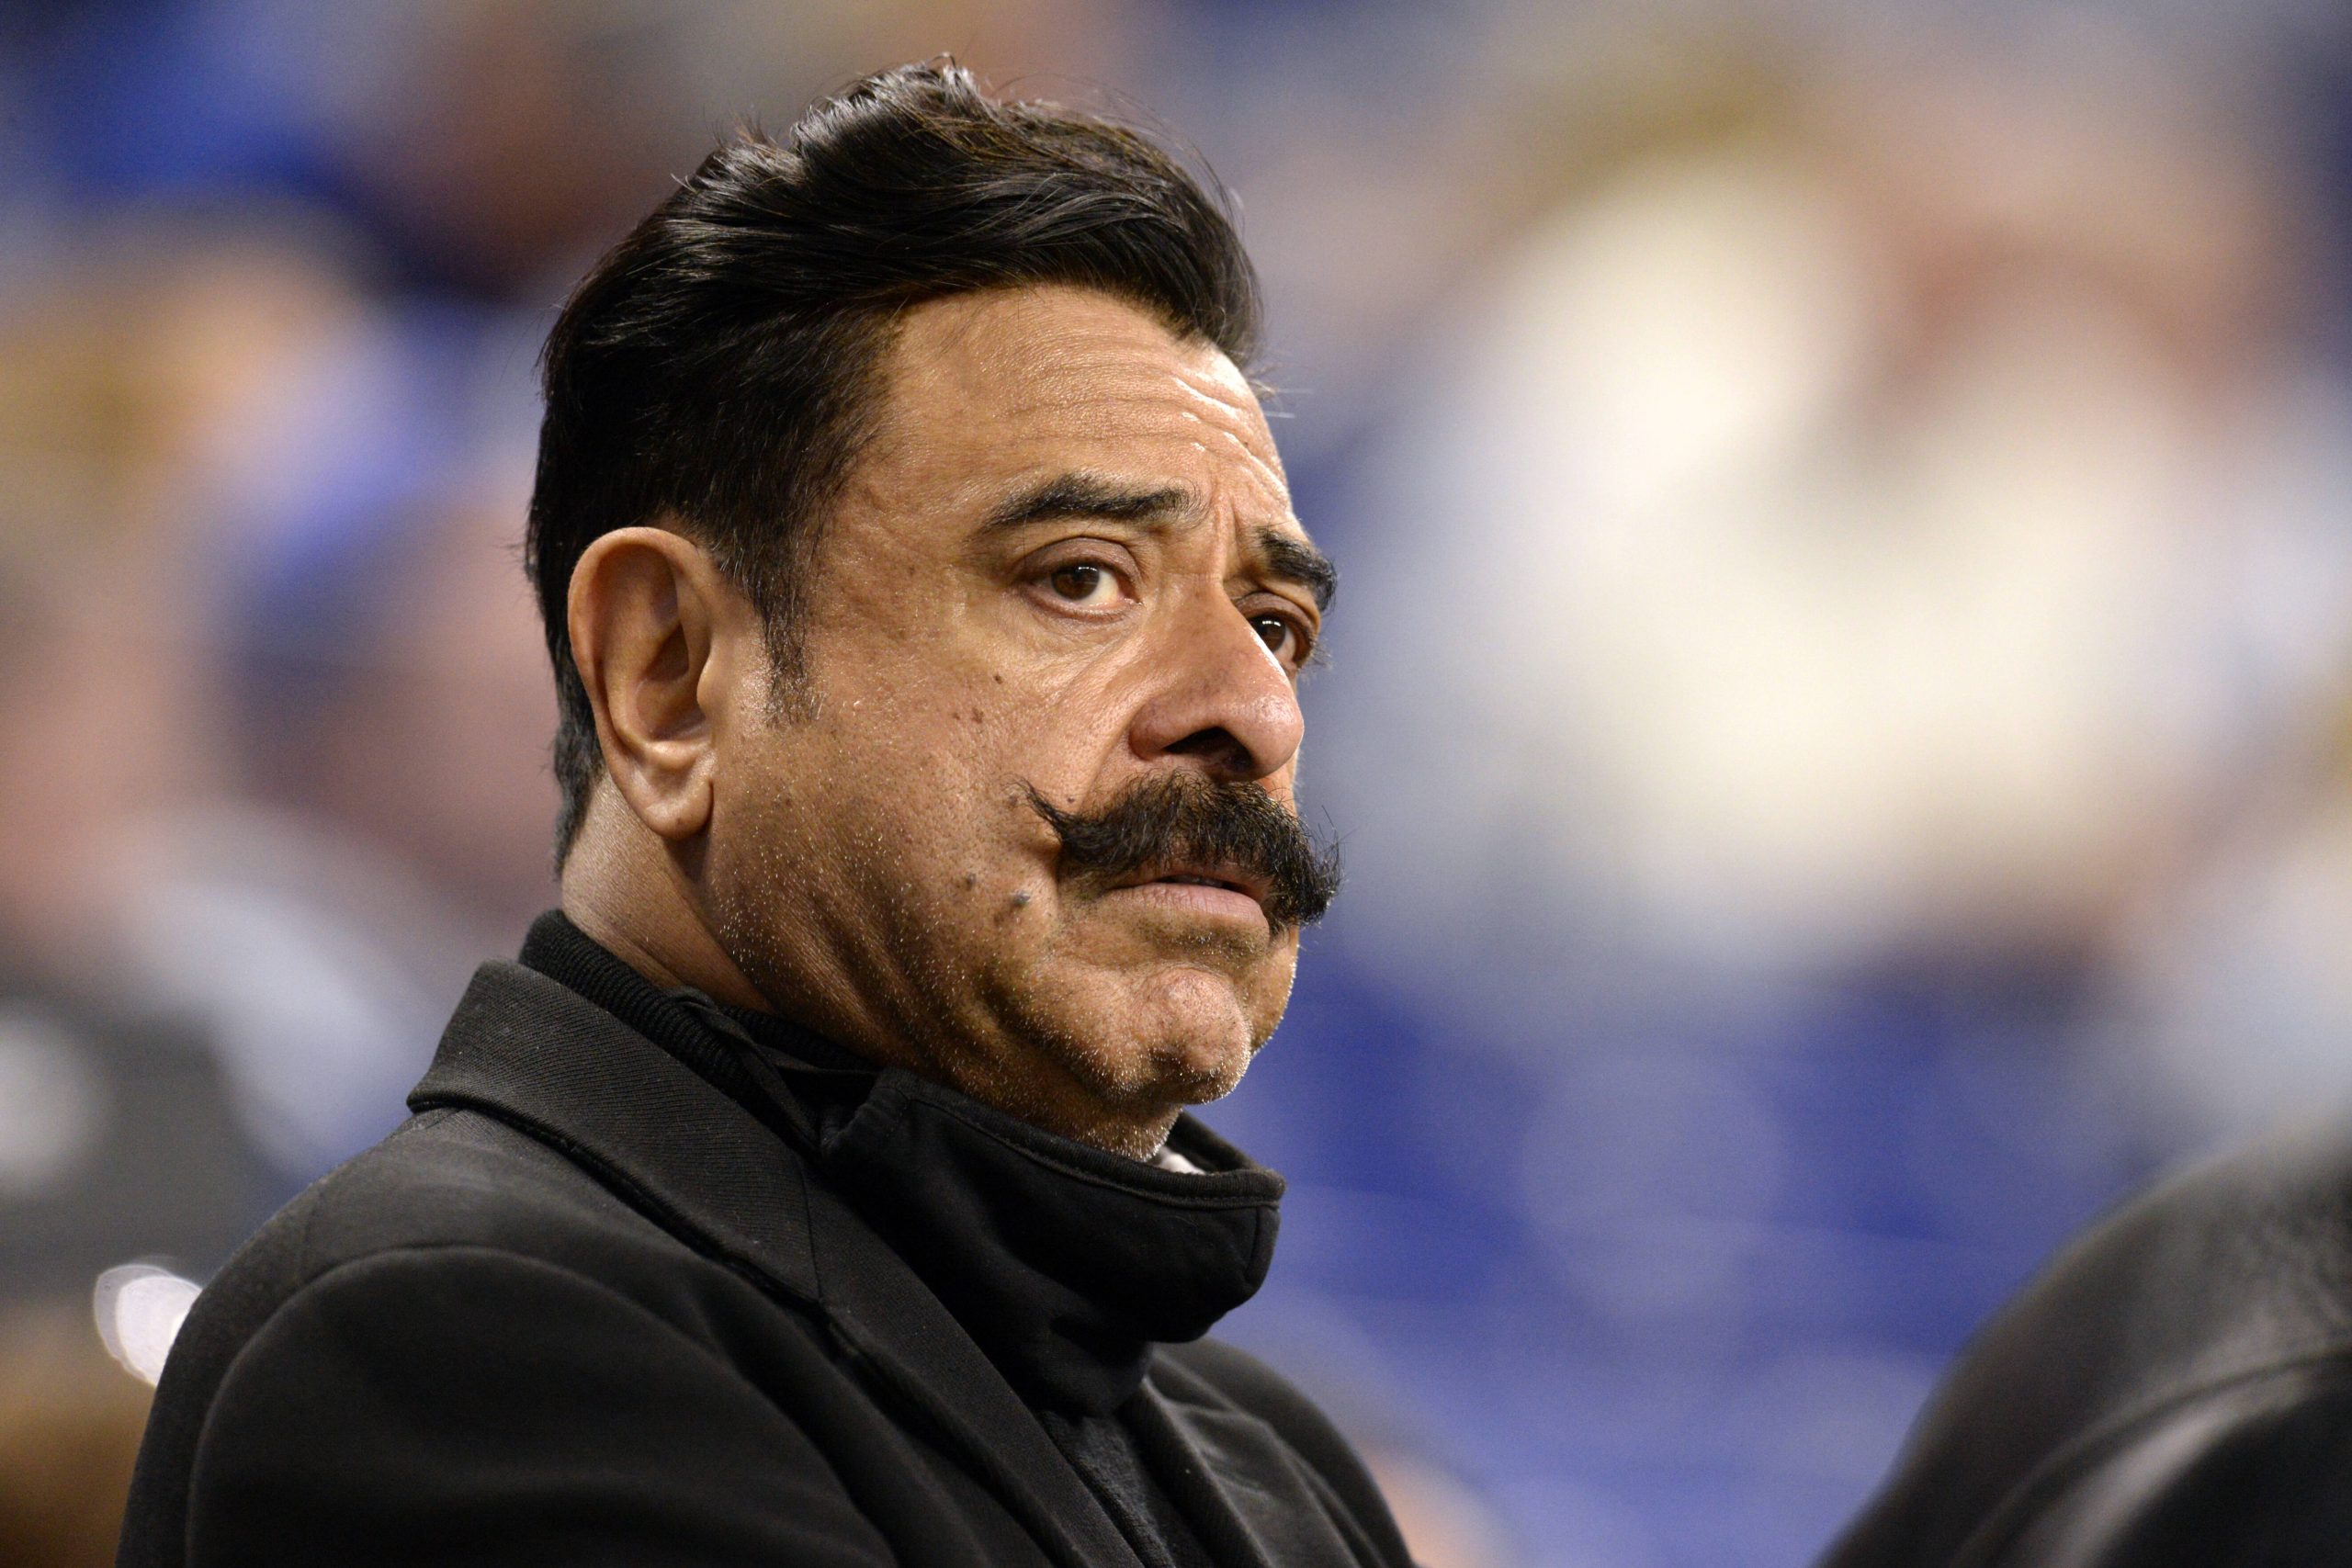 INDIANAPOLIS, IN - NOVEMBER 14: Jacksonville Jaguars owner Shad Khan looks on before the start of the NFL, American Foot